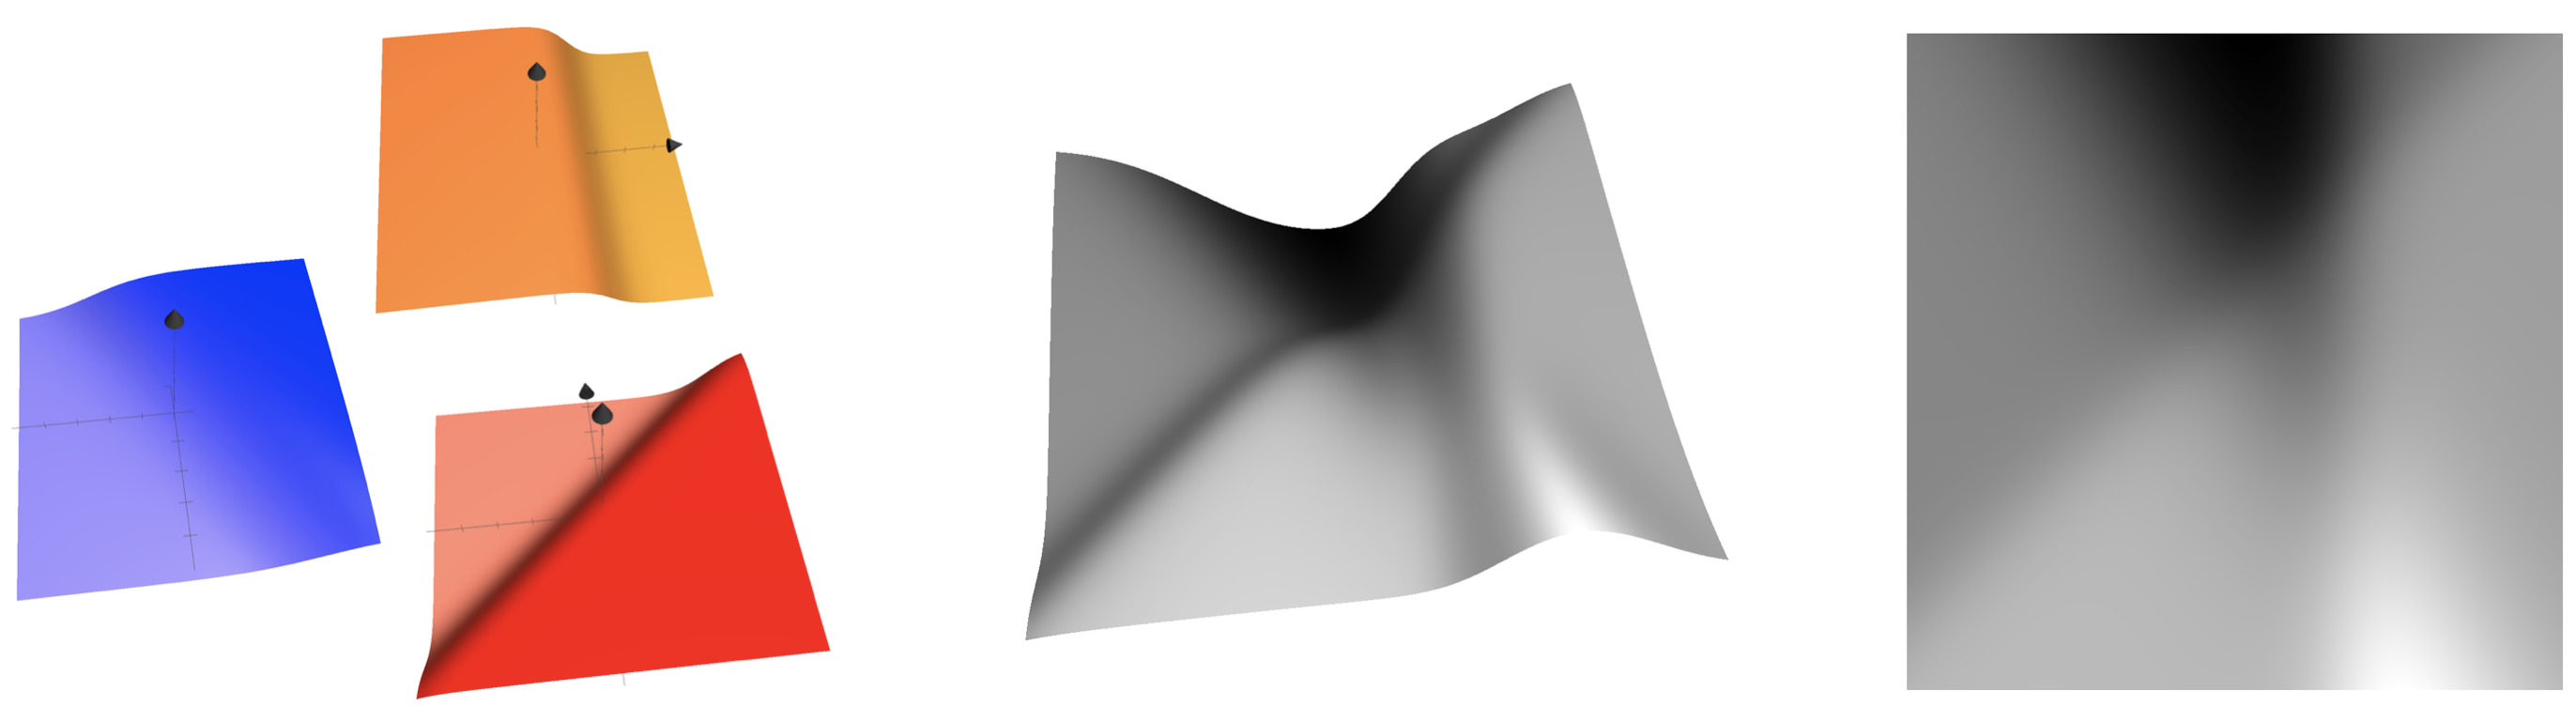 Figure 5: Each of the three sigmoid-based surfaces on the left is a single output value of the first layer of a neural network. The middle surface is a linear combination of these three values. The right image is an overhead view of the middle plot.